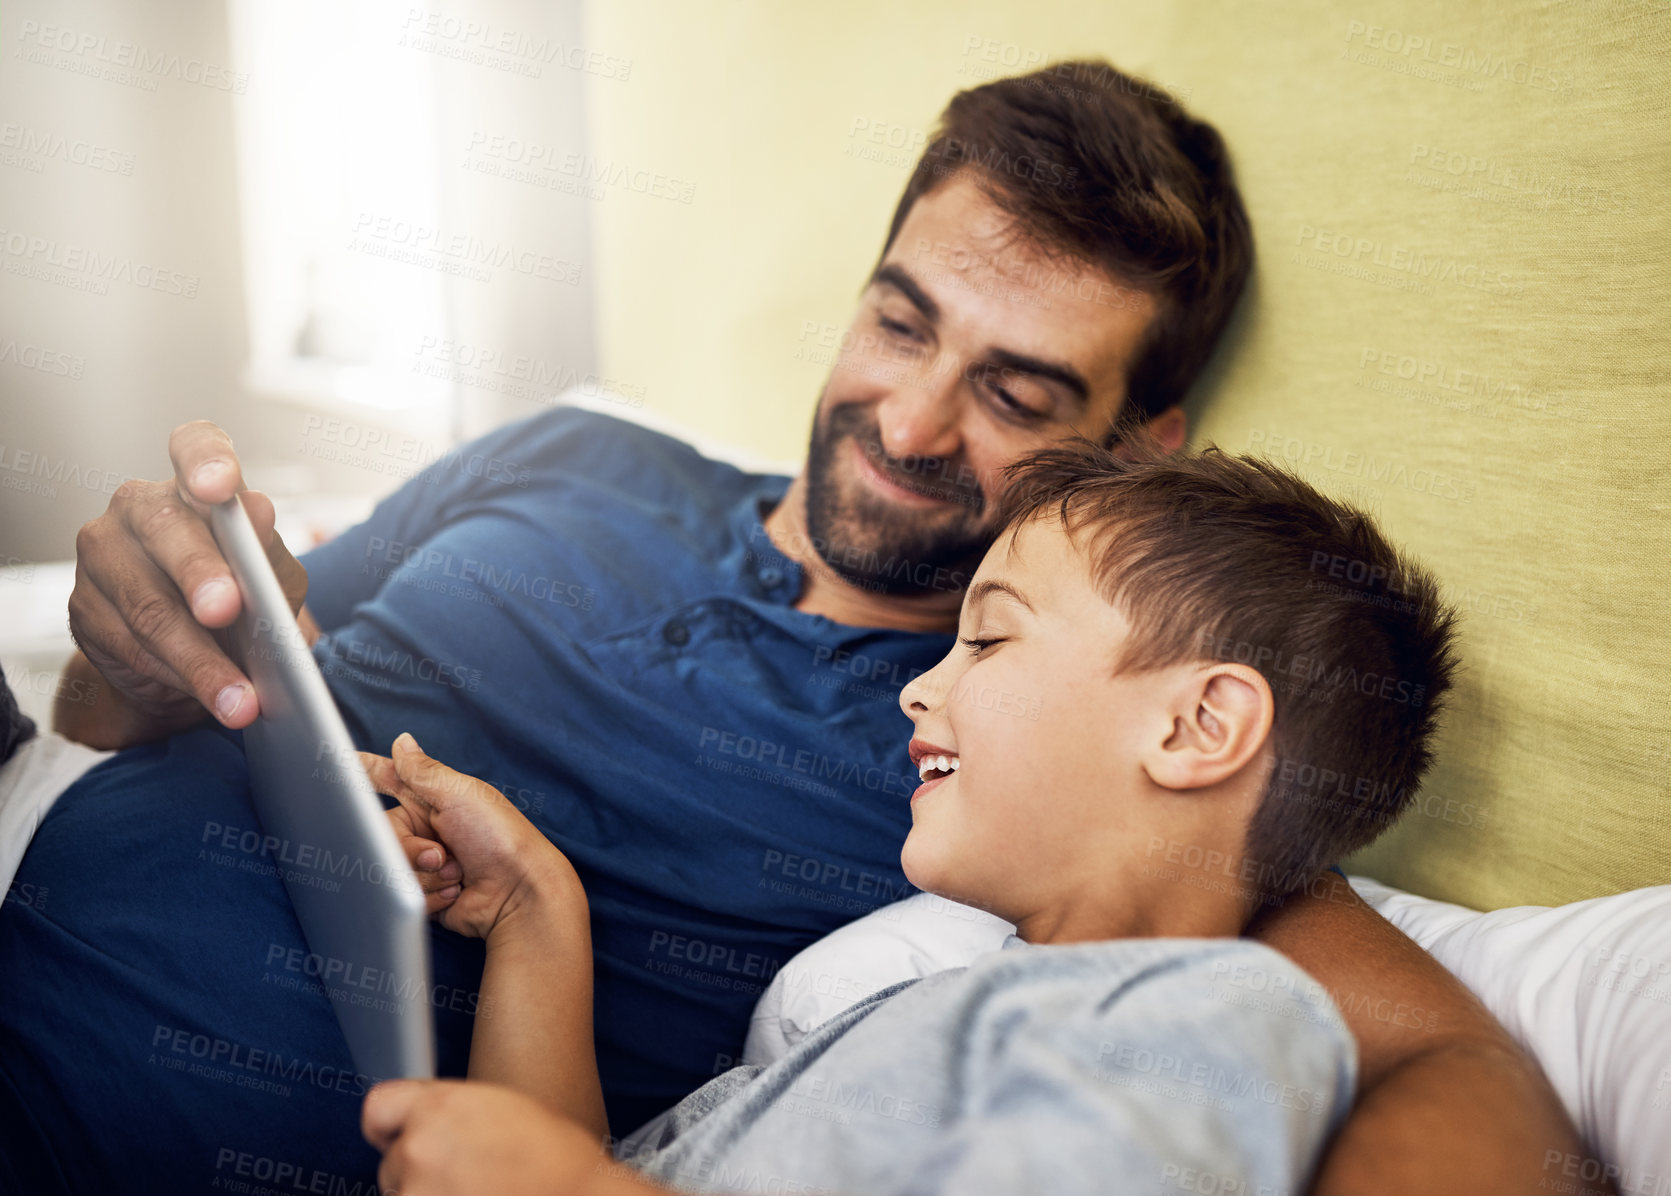 Buy stock photo Shot of a young man using a digital tablet with his son at home